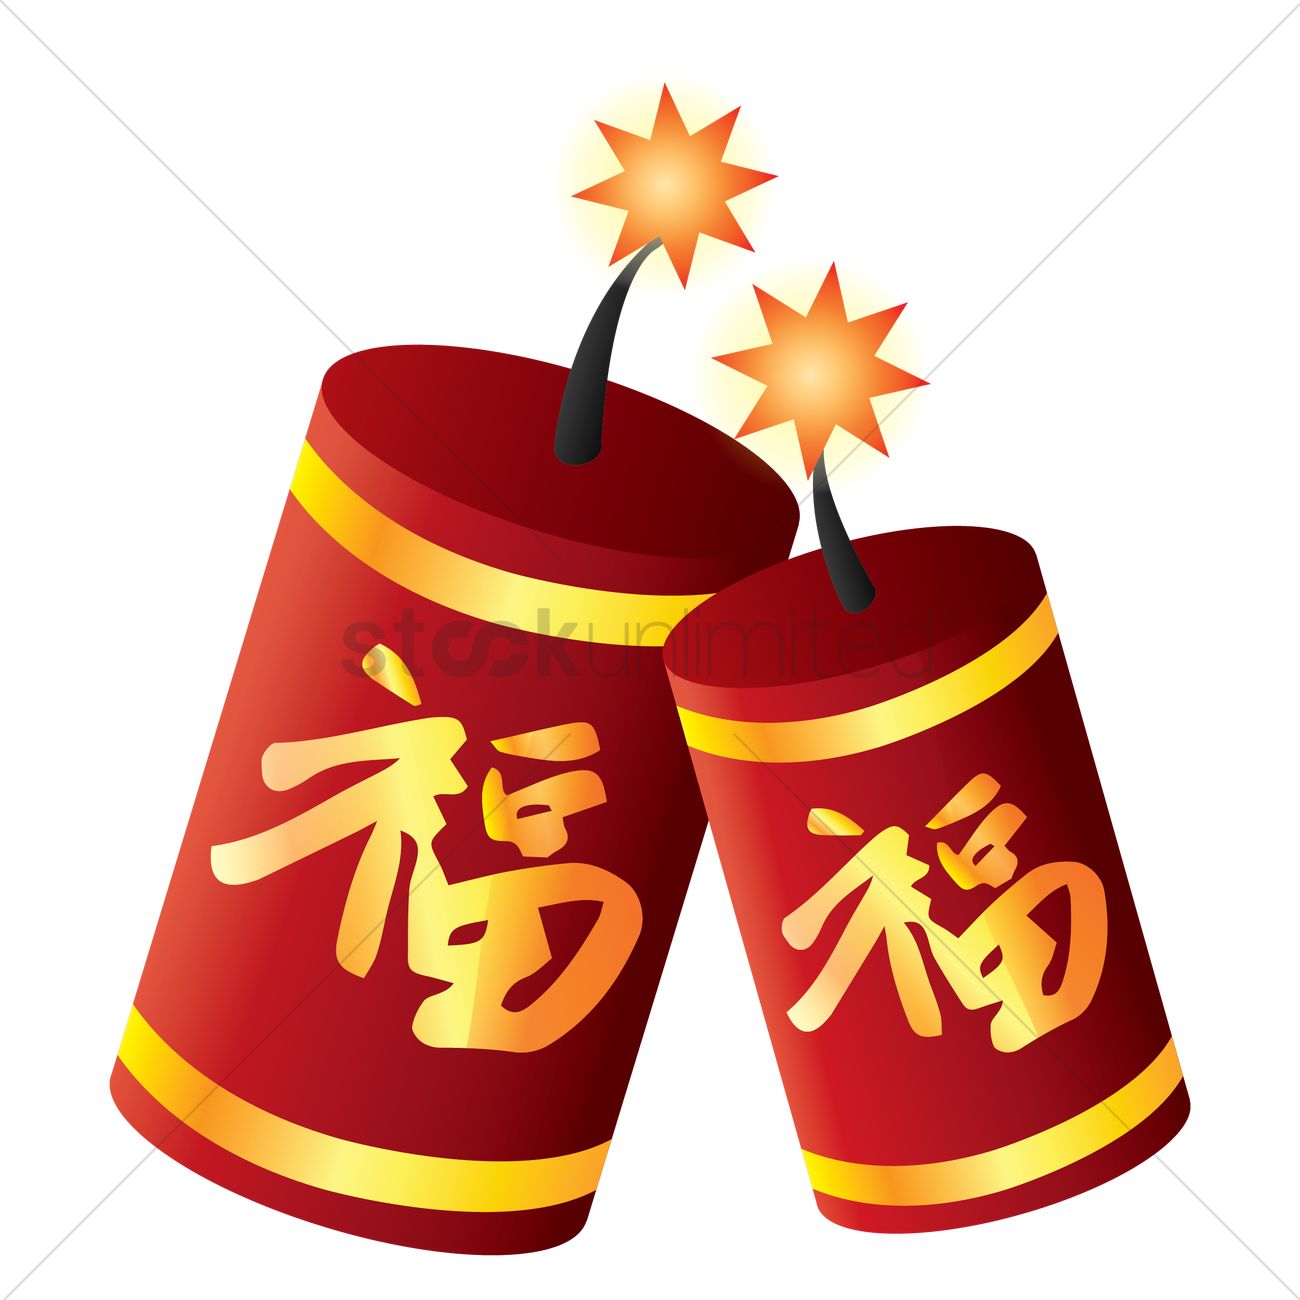 Chinese new year fire crackers Vector Image.